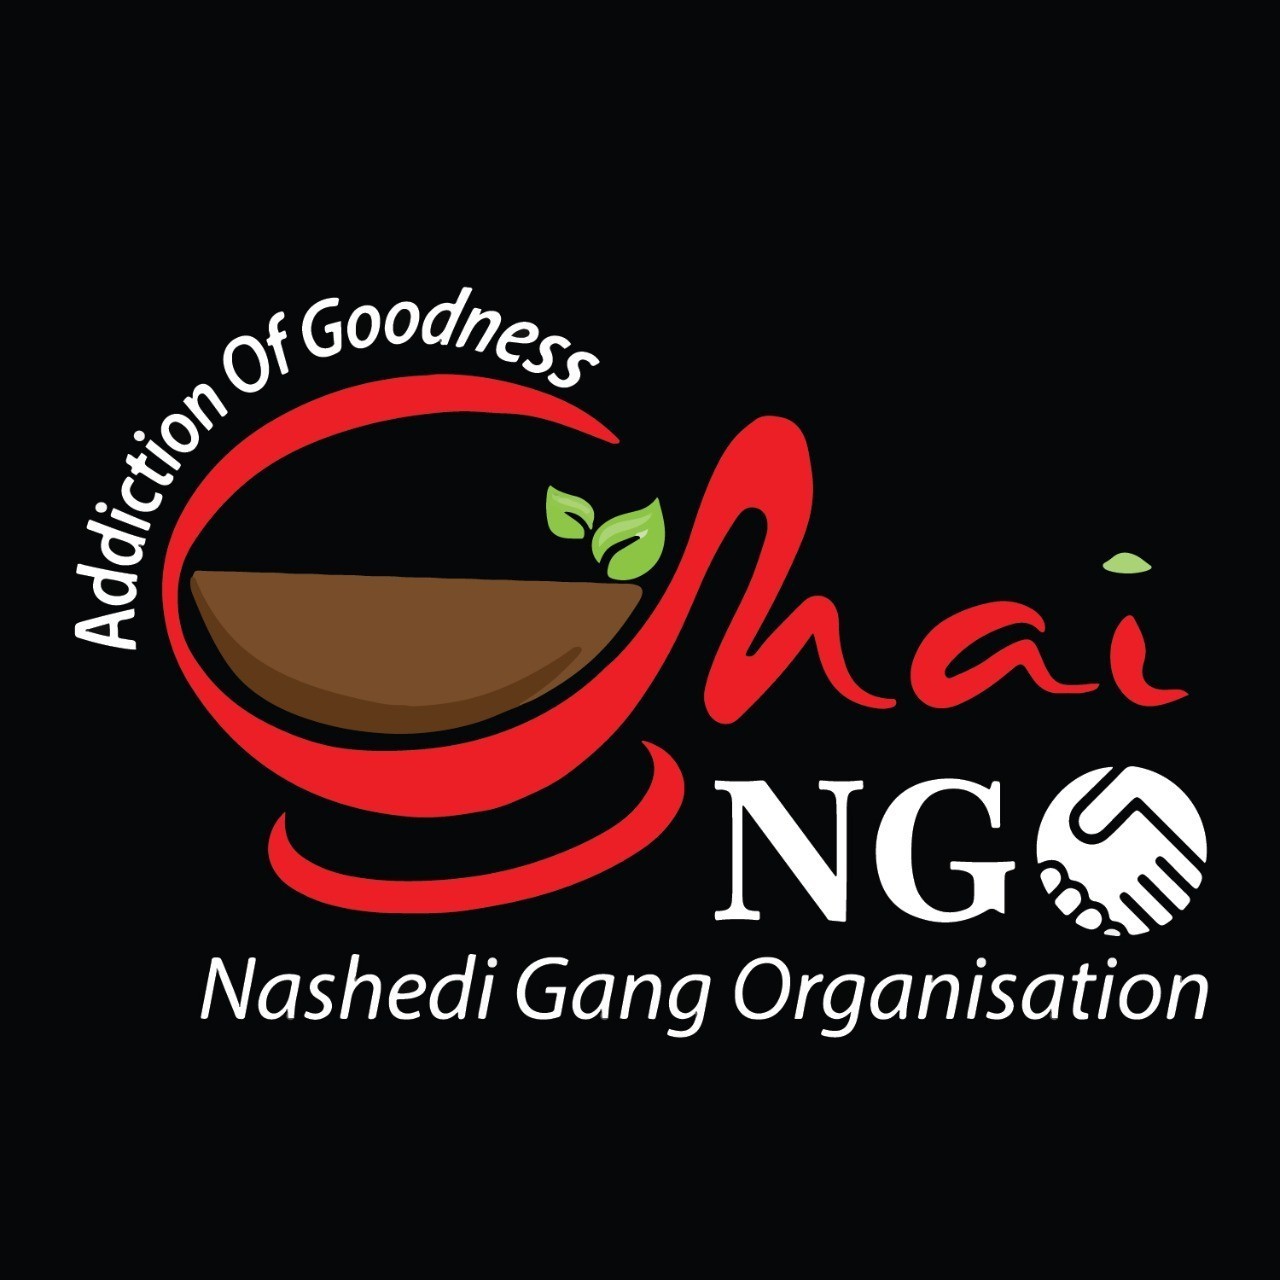 Food Franchise Business Opportunity  Chai NGO Chaat Formula and Chic